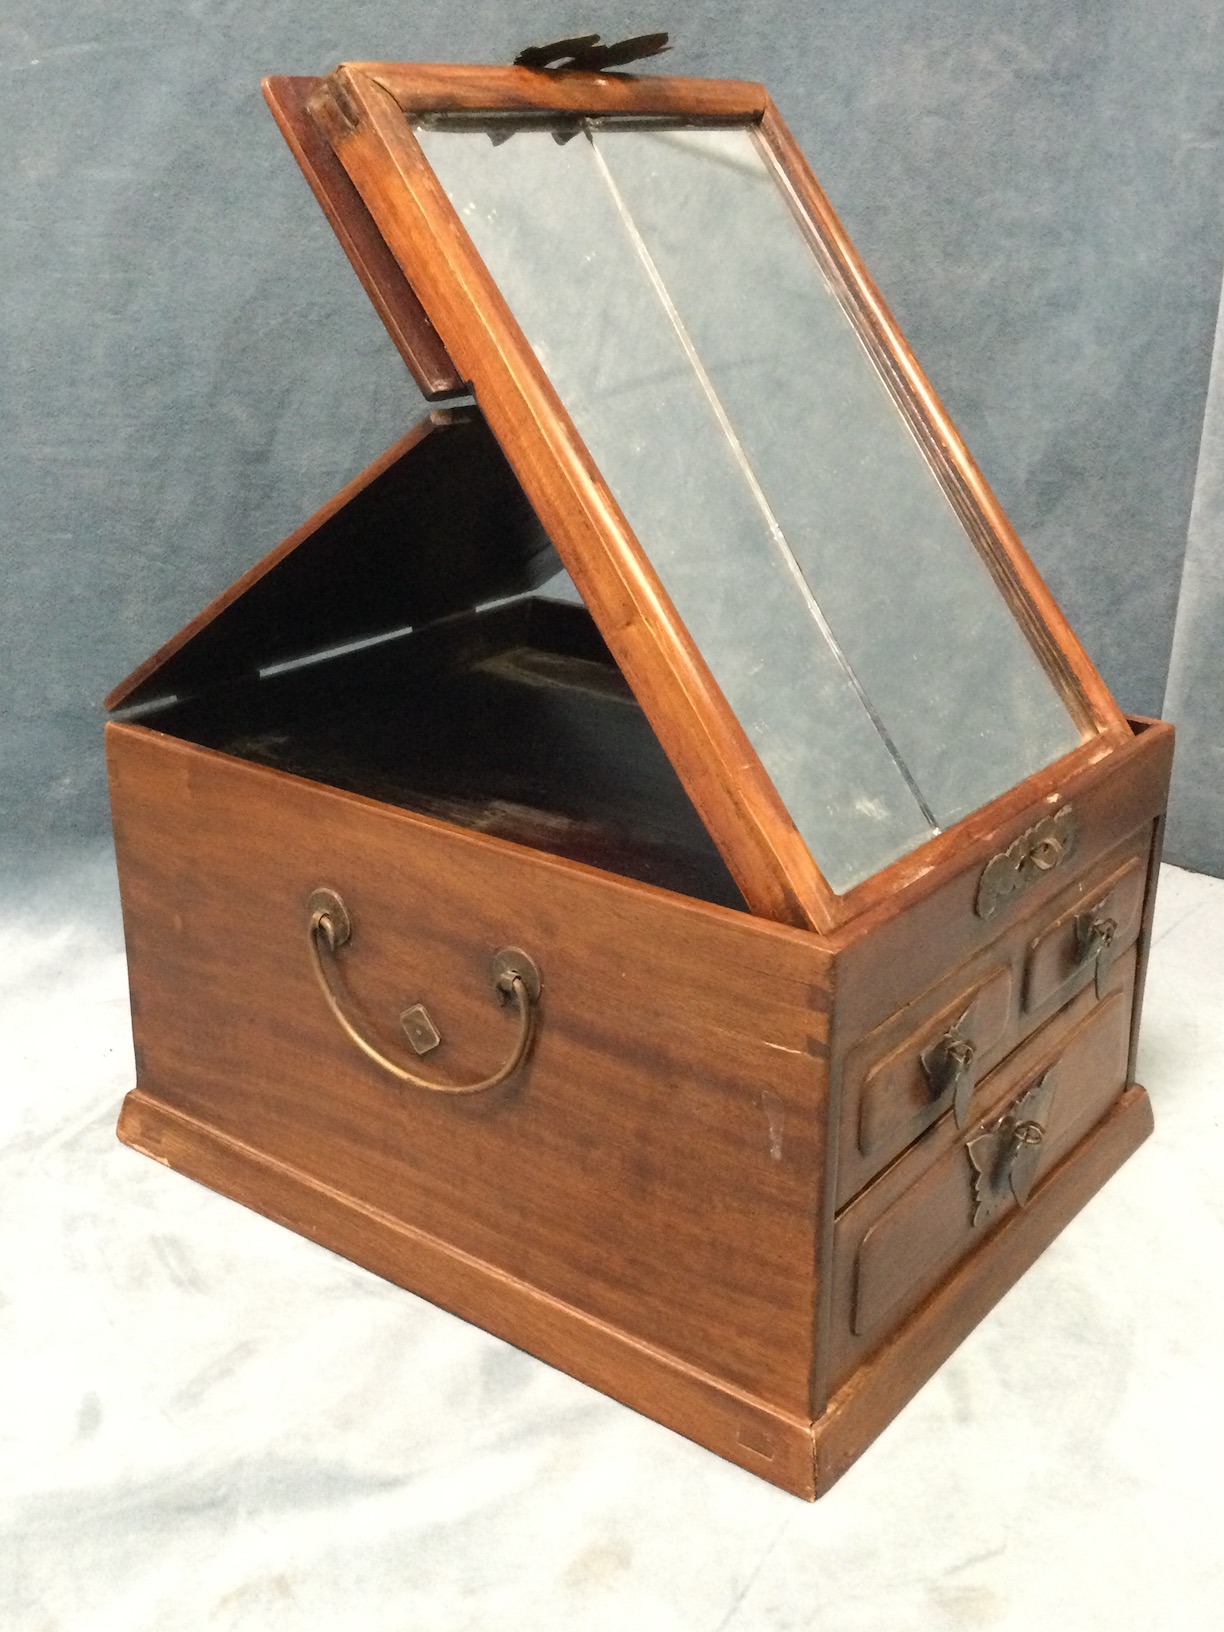 A Japanese dressing box with pierced decorative mounts, the hinged lid revealing a framed mirror - Image 2 of 3